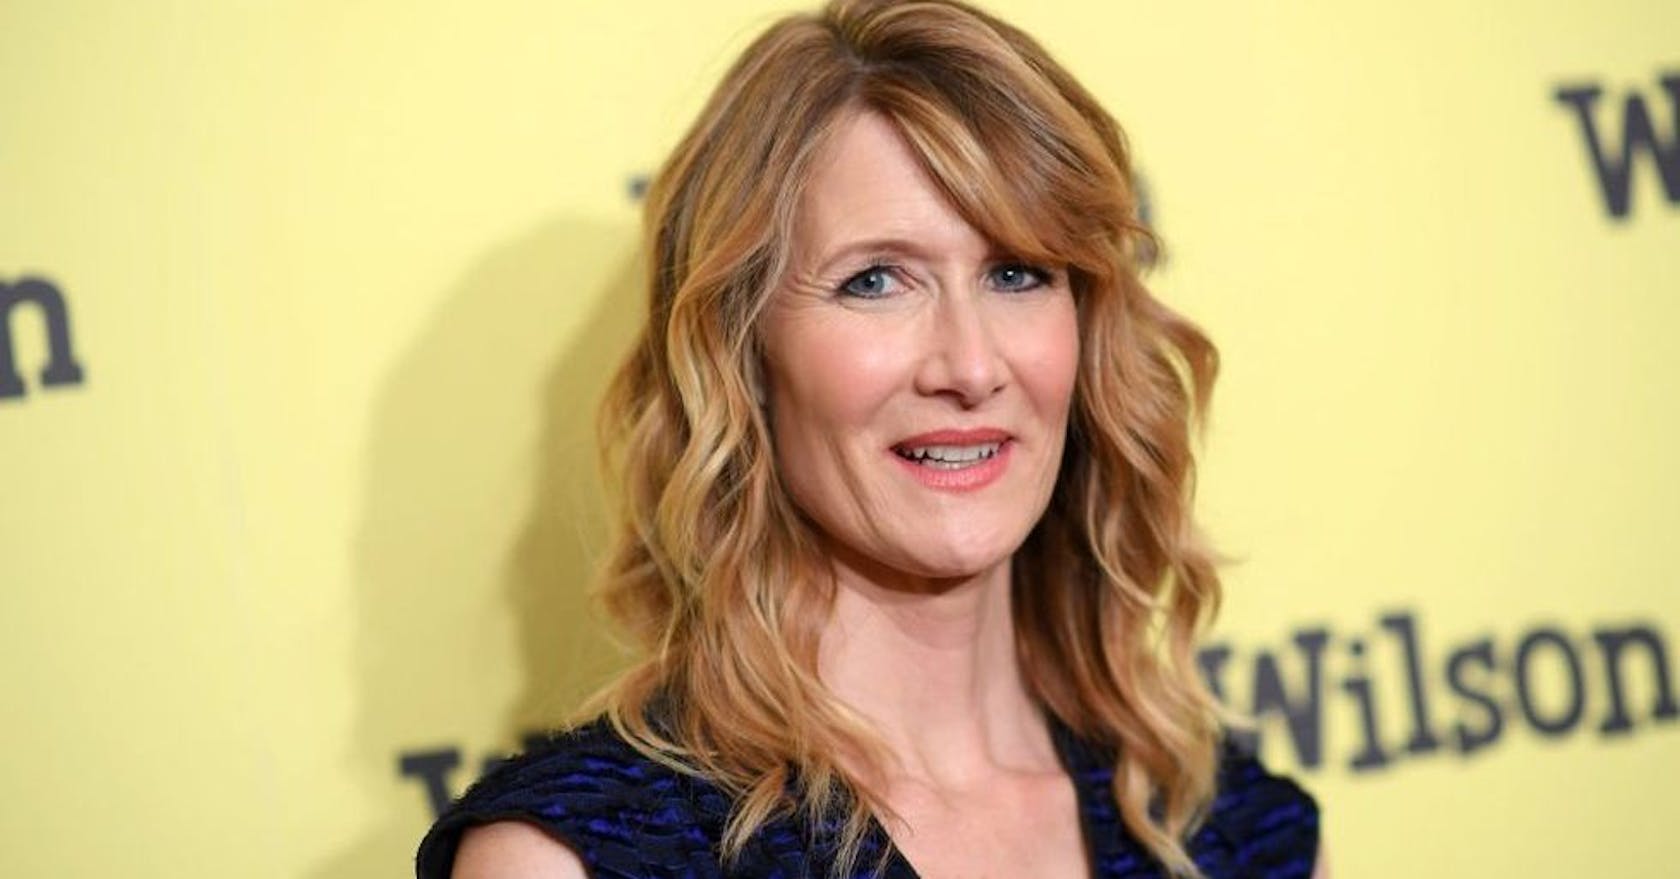 Laura Dern says Jurassic Park was more feminist than you might have thought